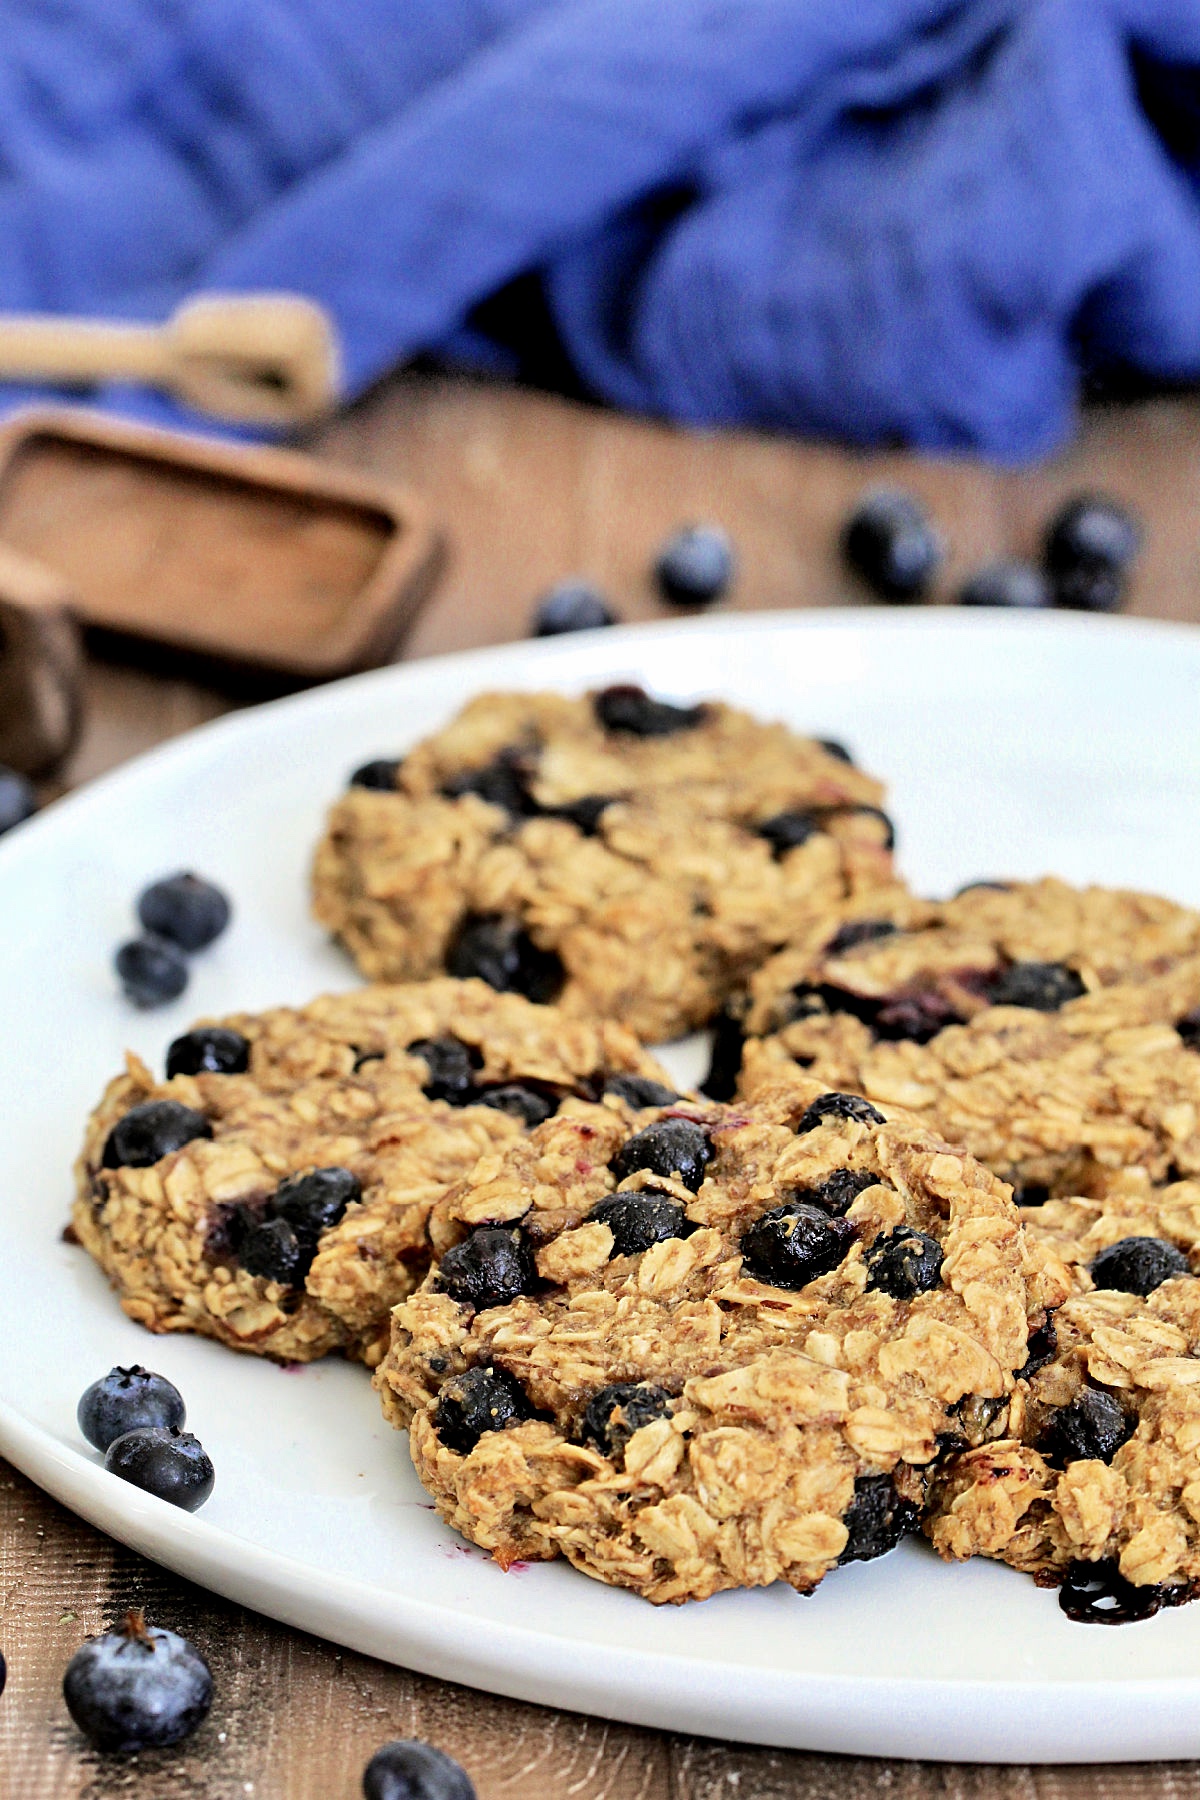 Blueberry oatmeal cookies on white plate surrounded by blueberries, wooden measuring spoons and a blue napkin.